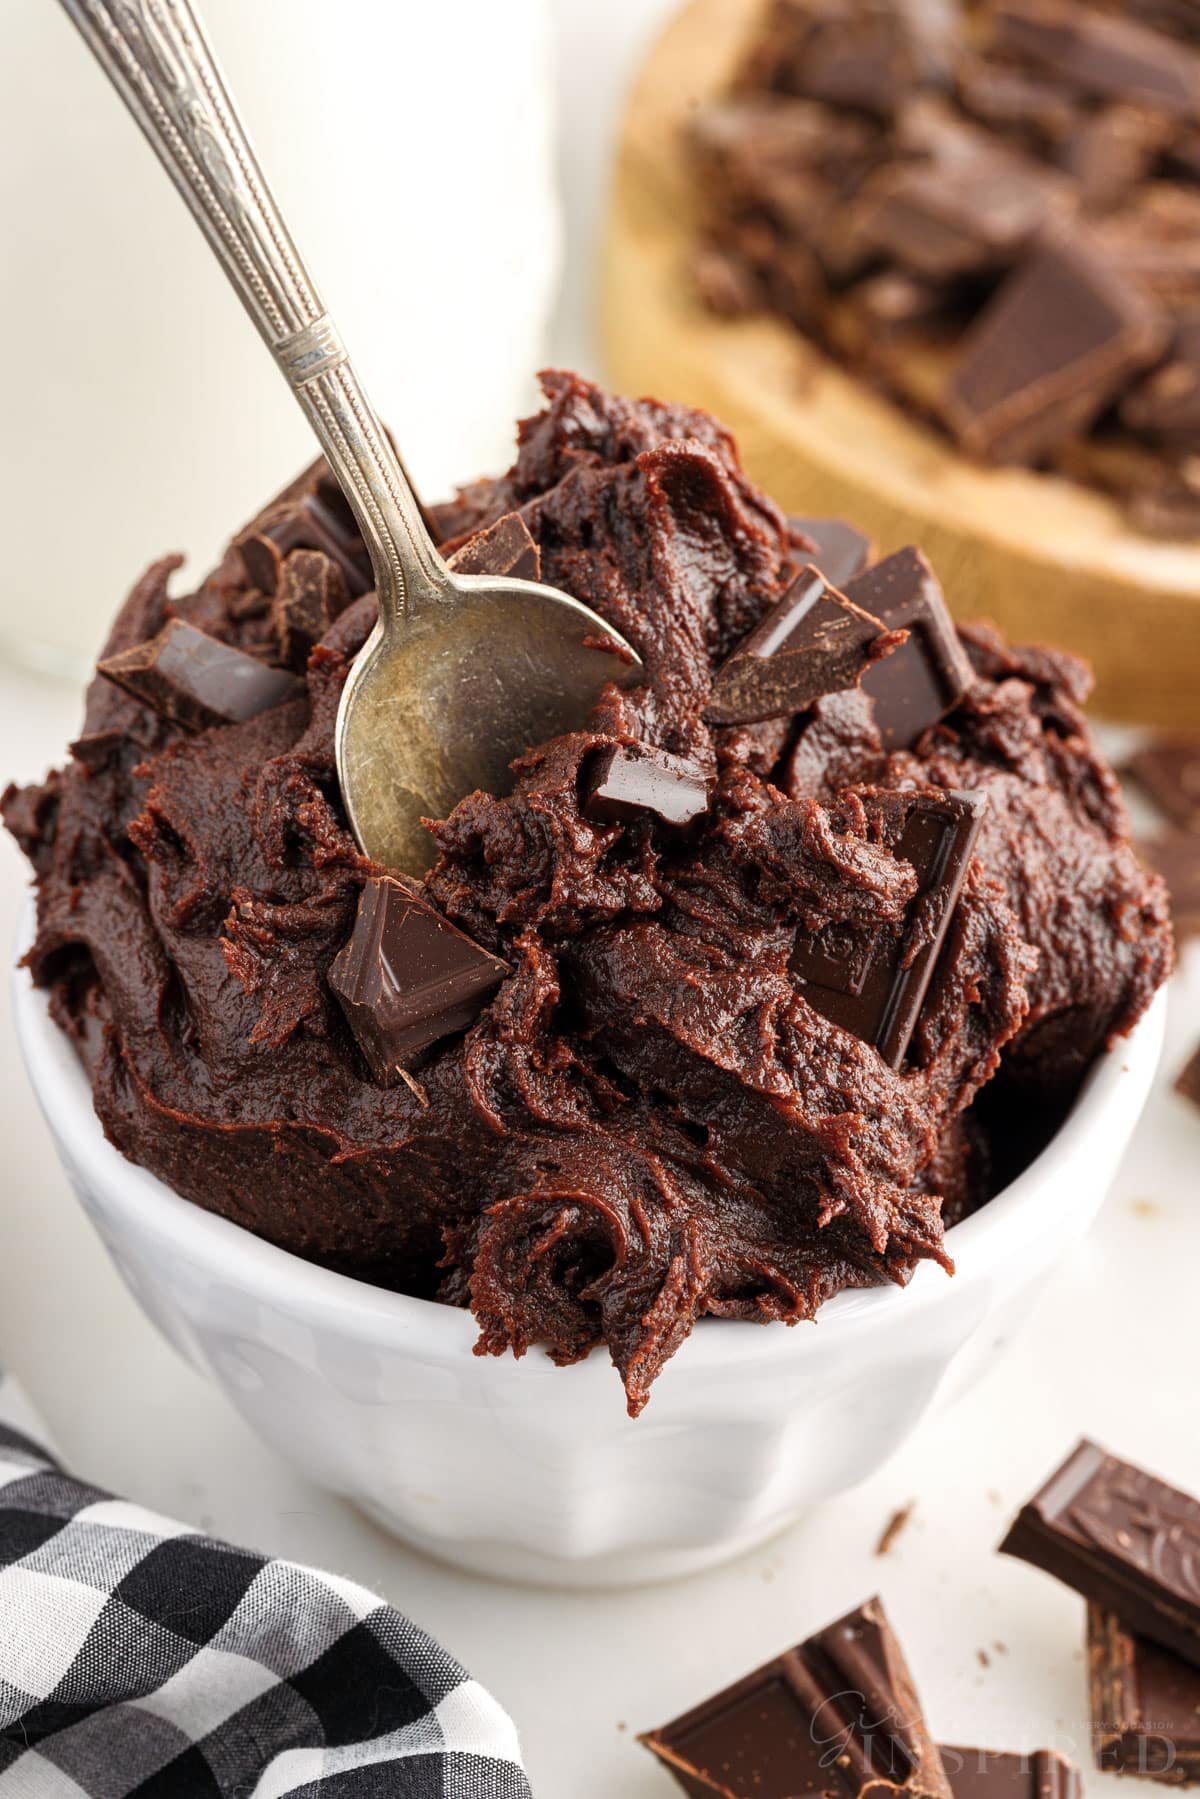 A serving bowl with Edible Brownie Batter a spoon inserted.